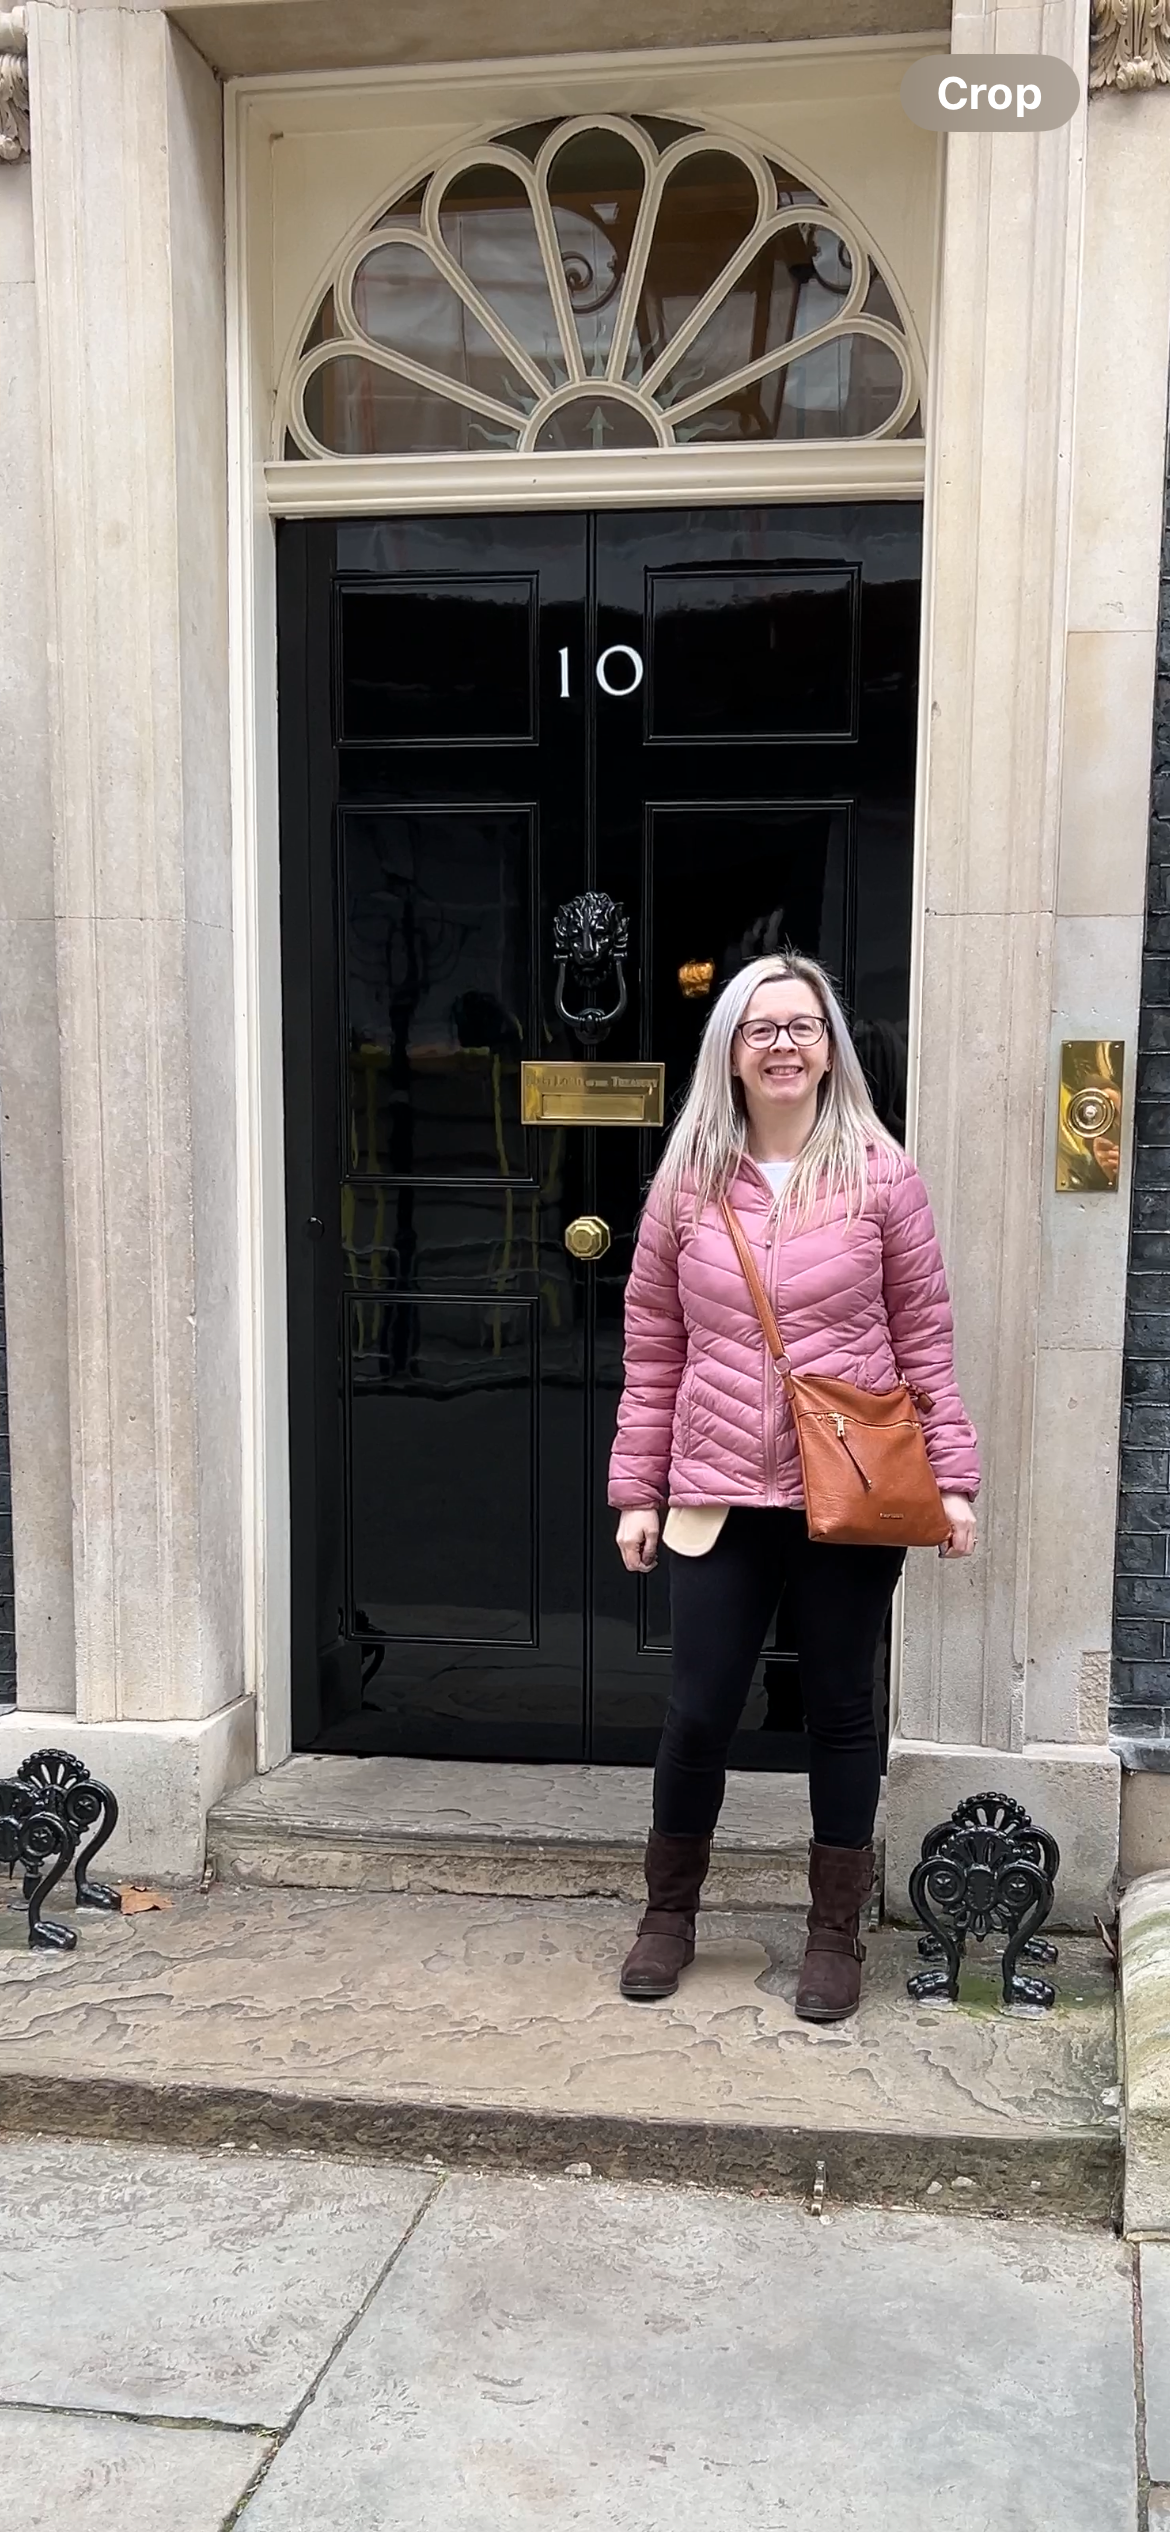 Hayley stood in front of 10 Downing Street, Hayley is wearing a pink coat, black trousers, brown jeans and a brown across body bag. Hayley is smiling at the camera.